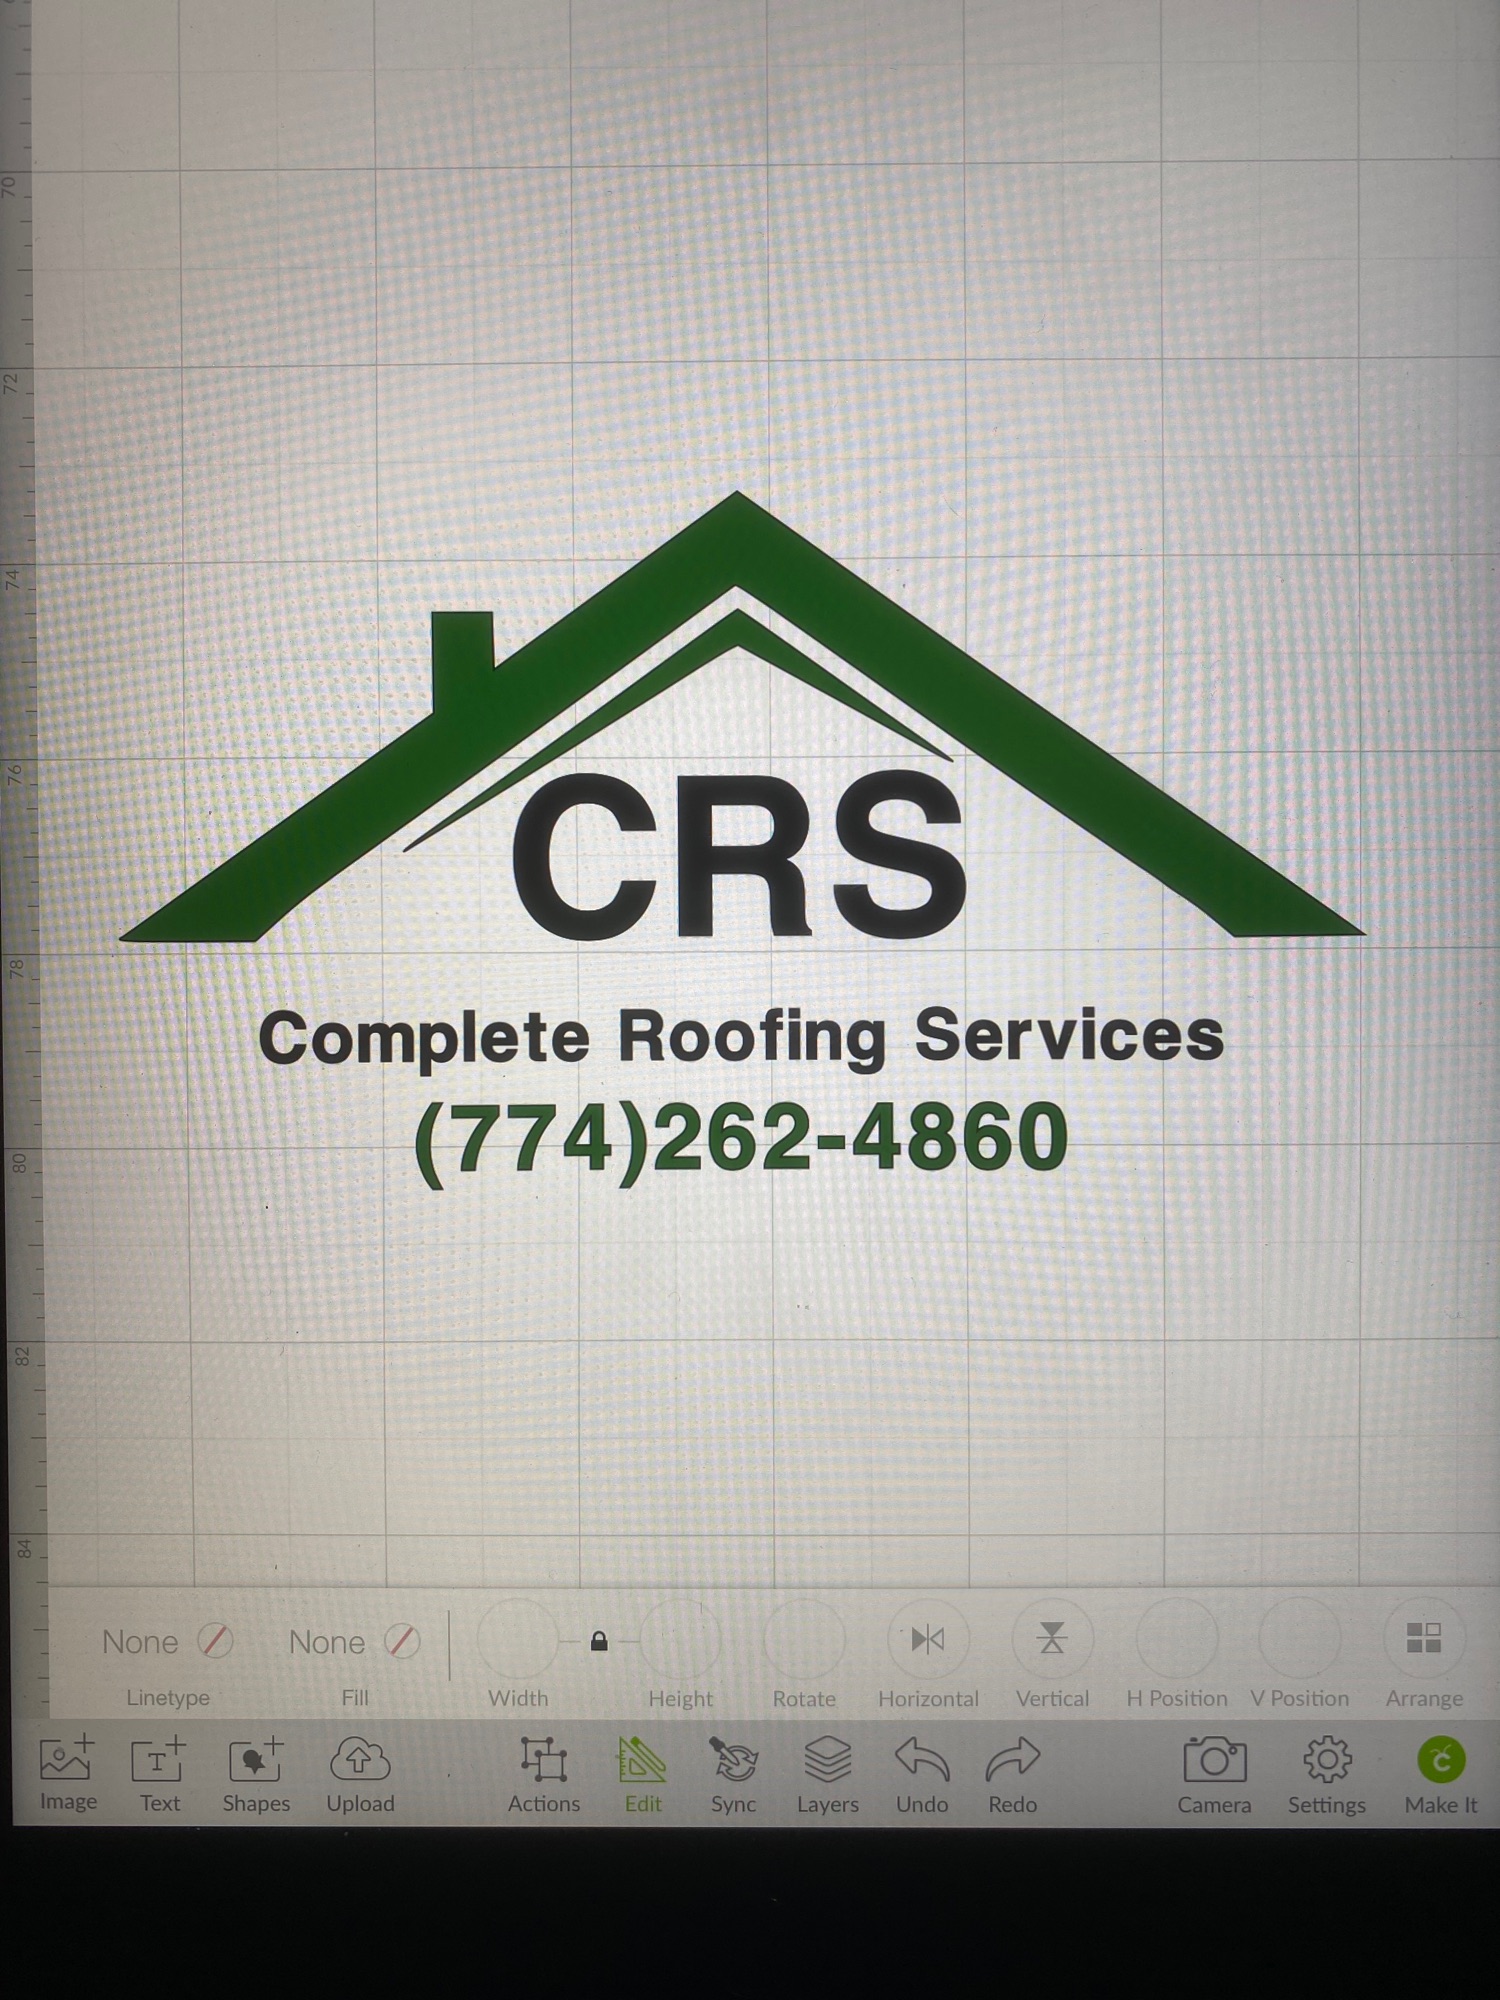 Complete Roofing Services Logo